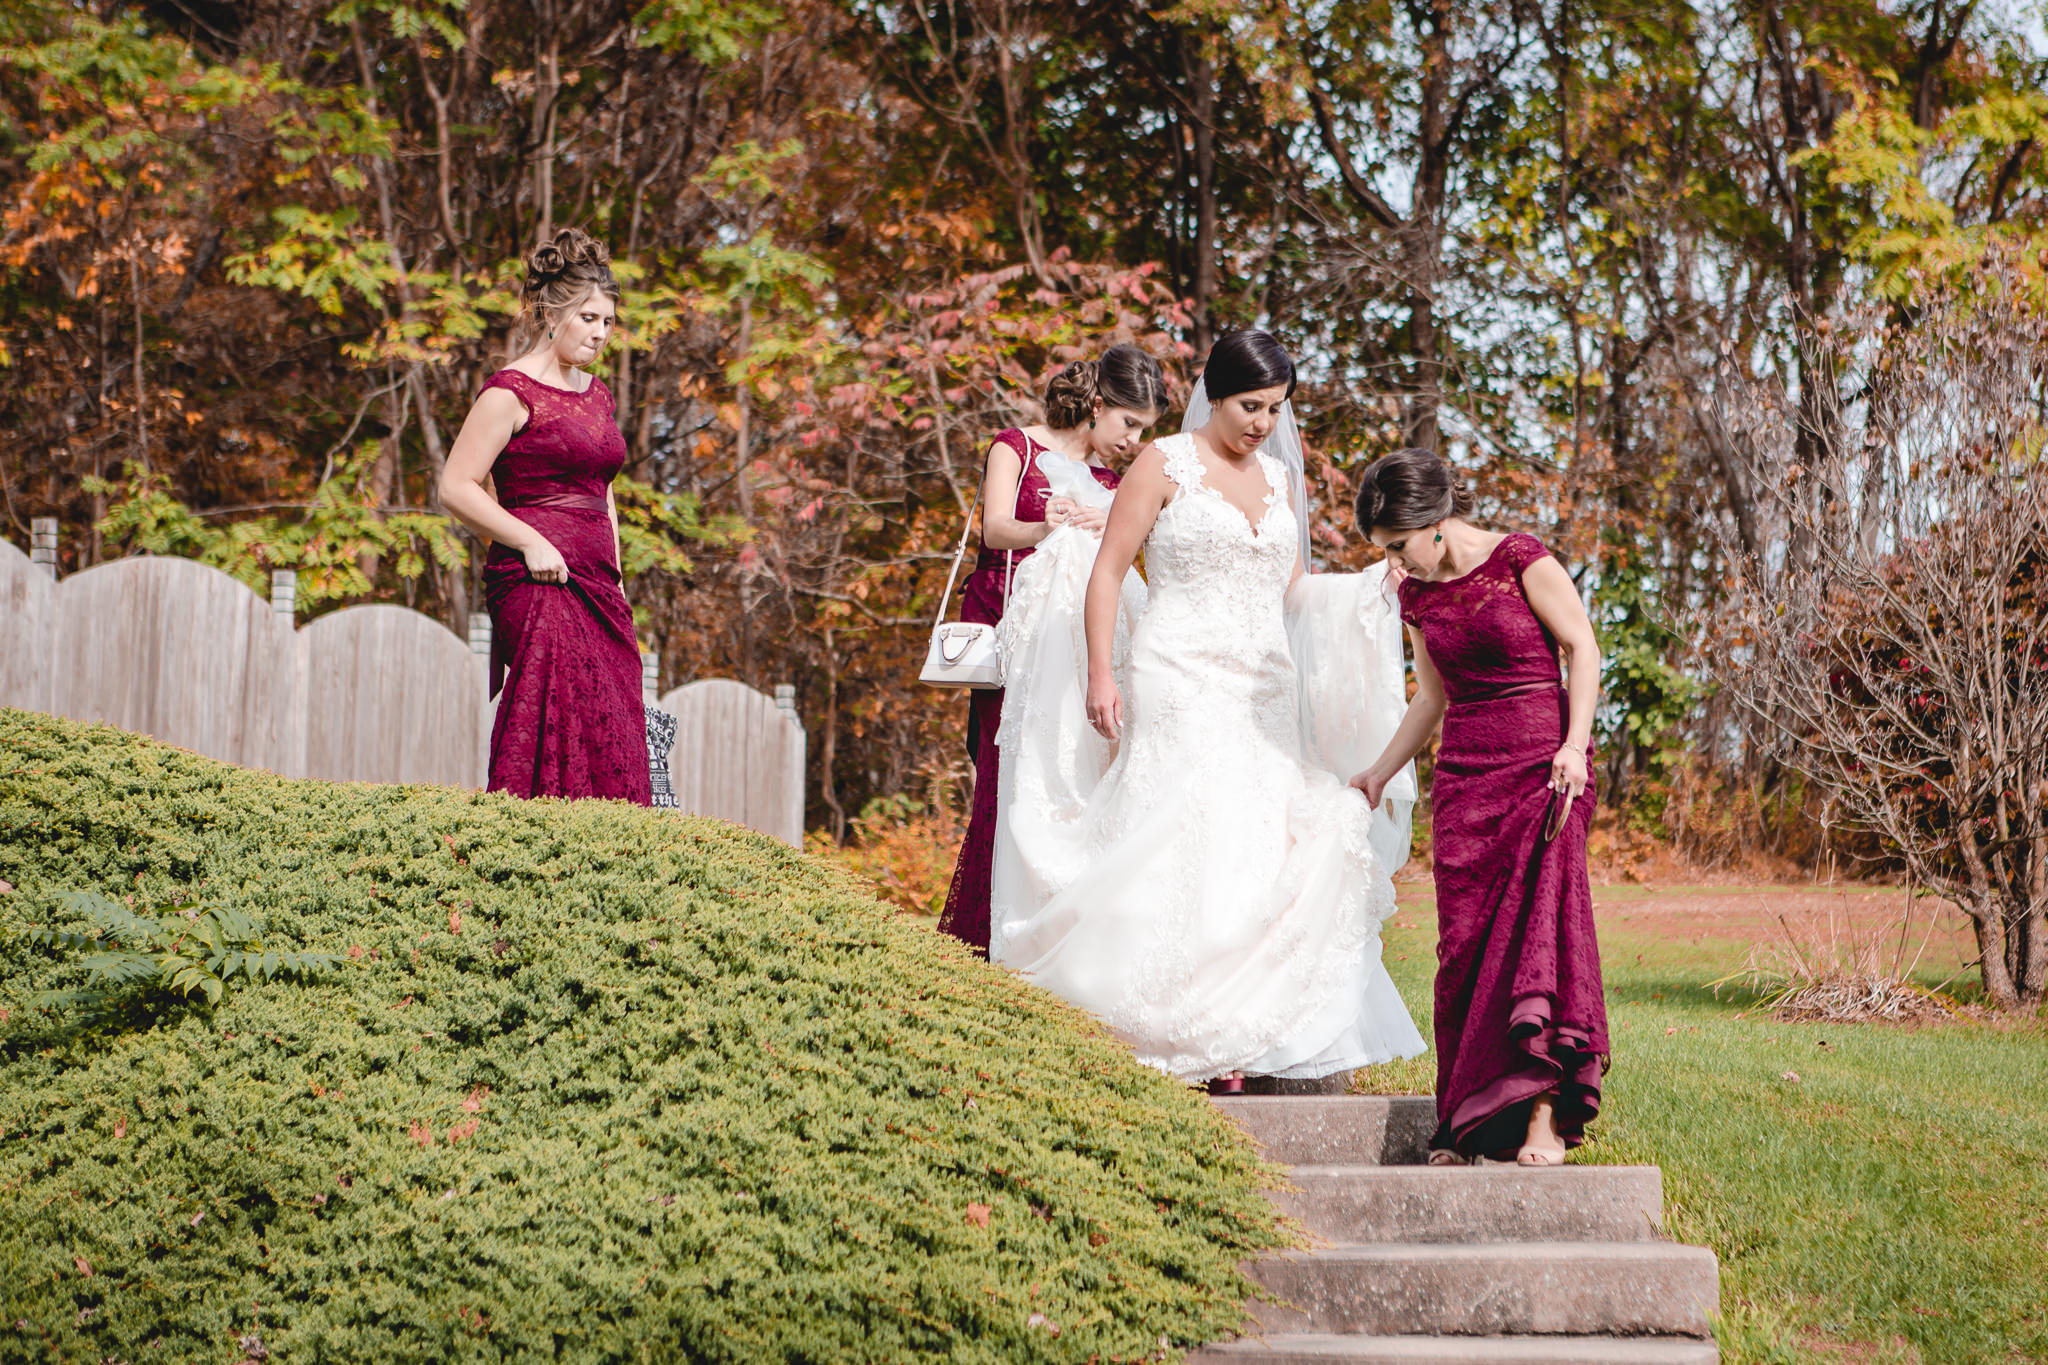 Bridesmaids help the bride down the steps on the way to the DoubleTree Pittsburgh Airport